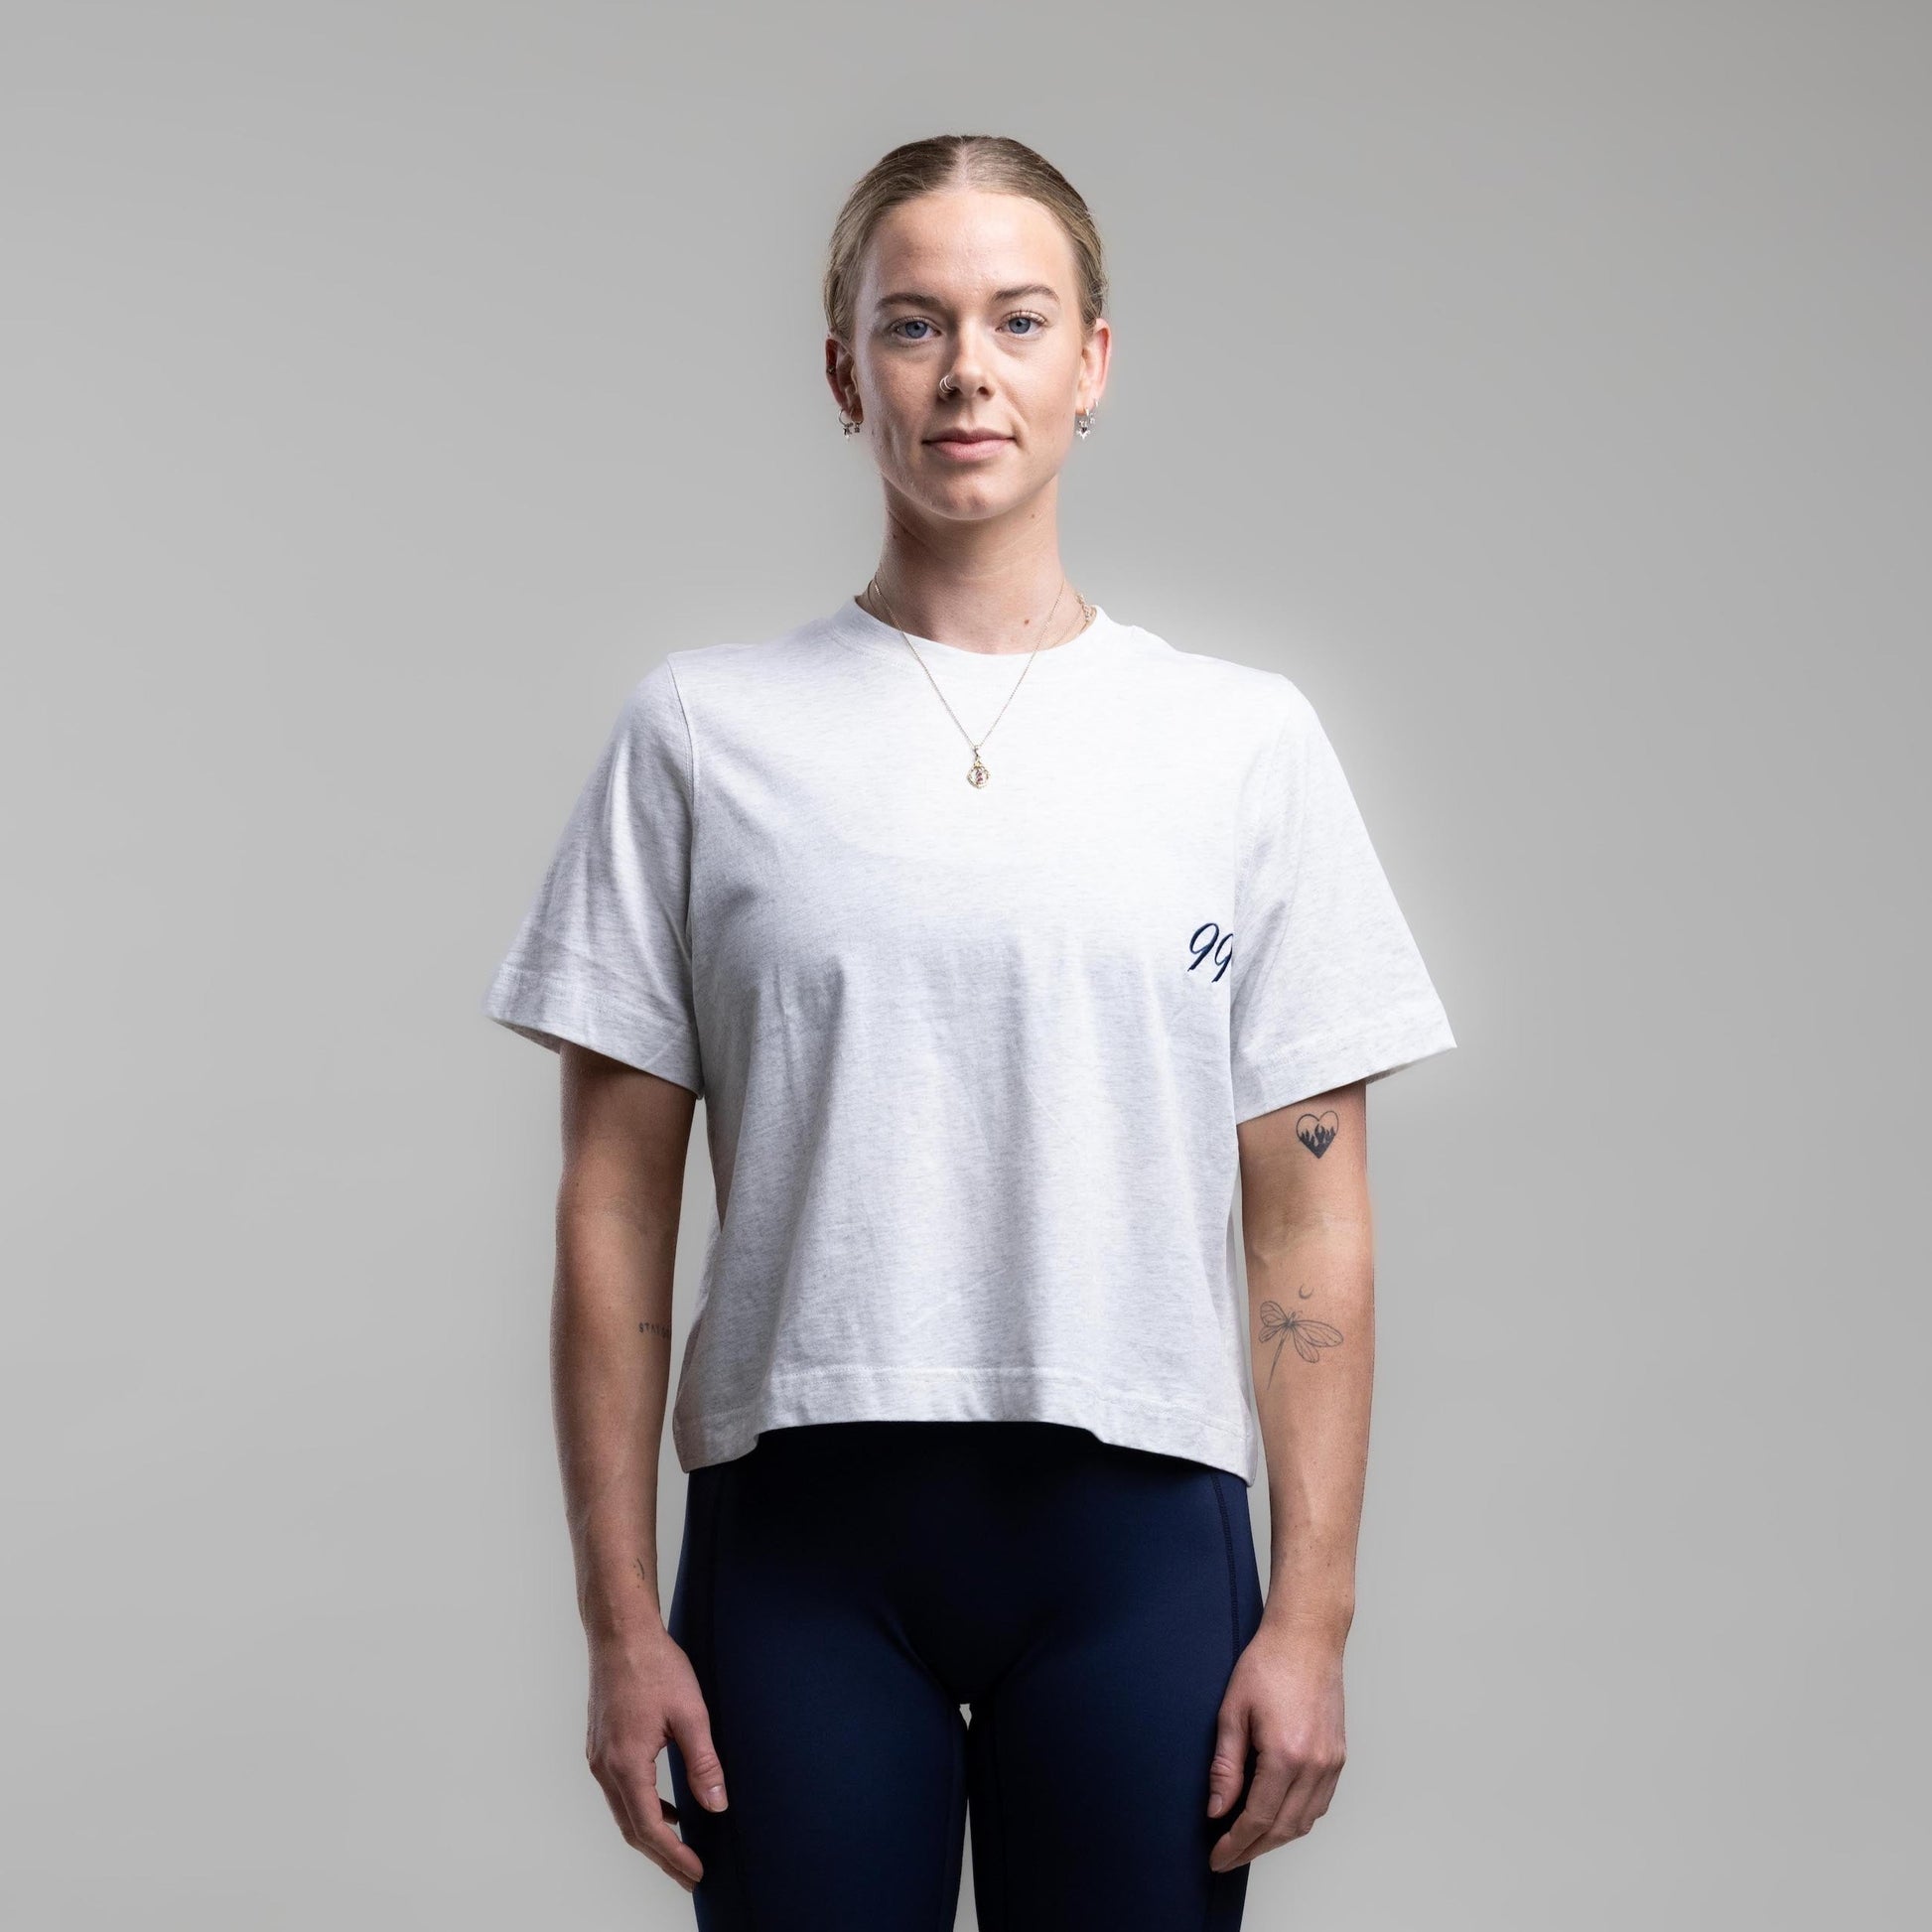 Unscripted Relax Tee - Women's - ilabb Canada